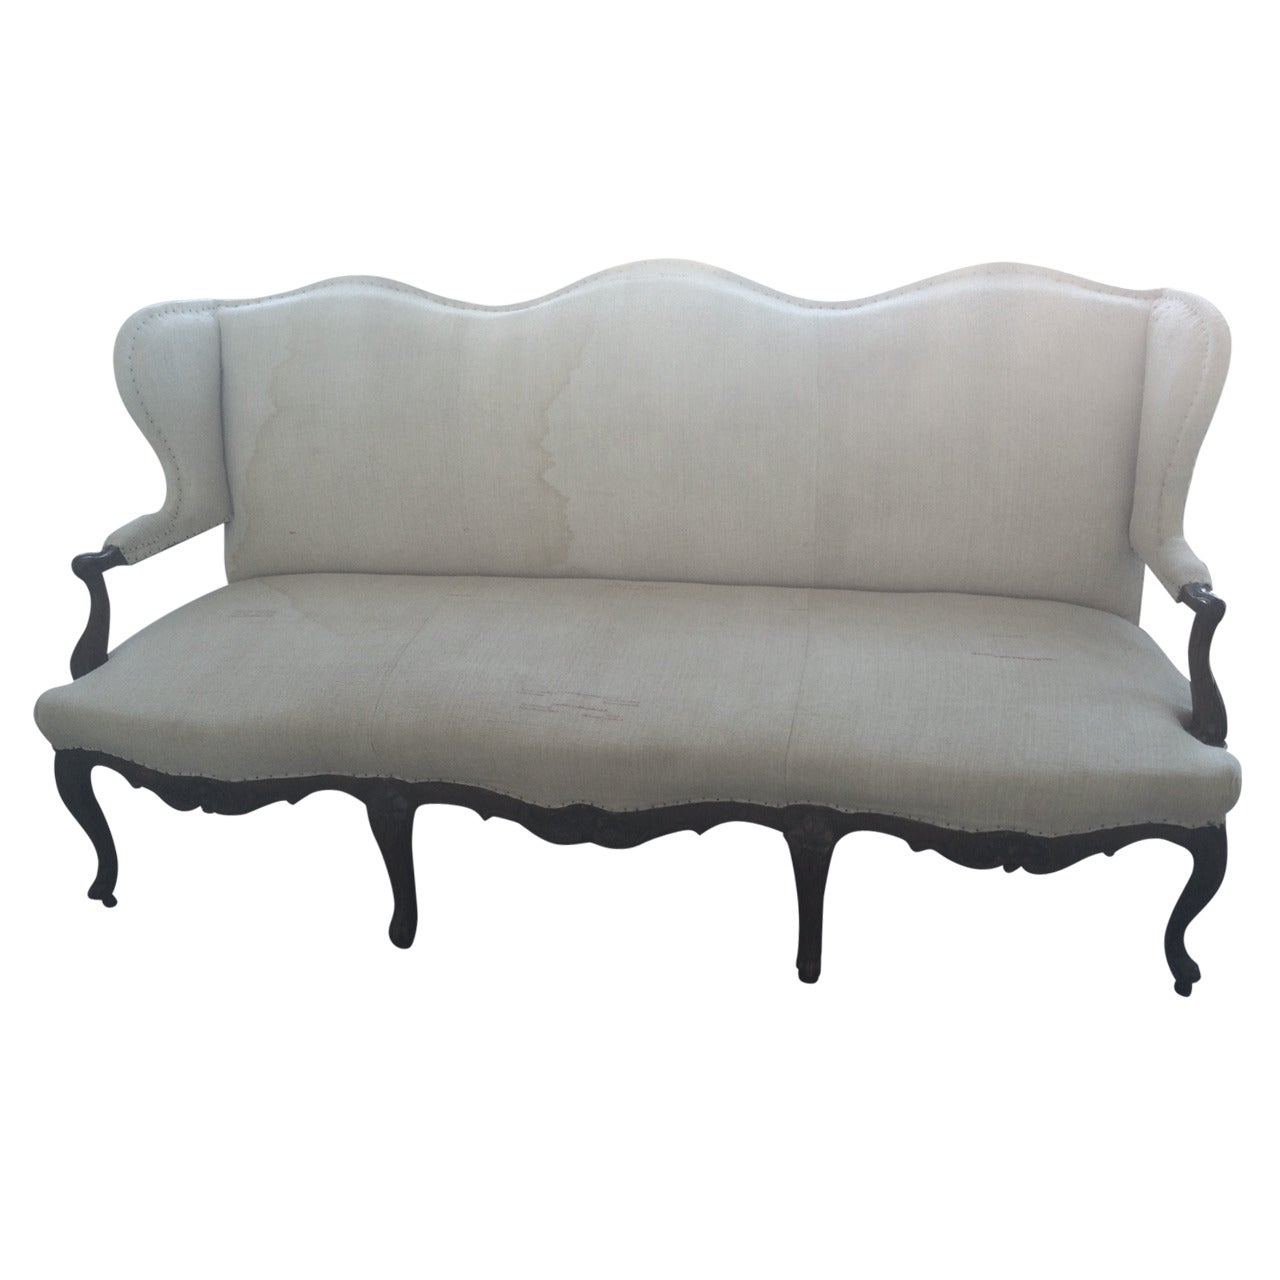 18th Century, French, Louis XV Sofa For Sale